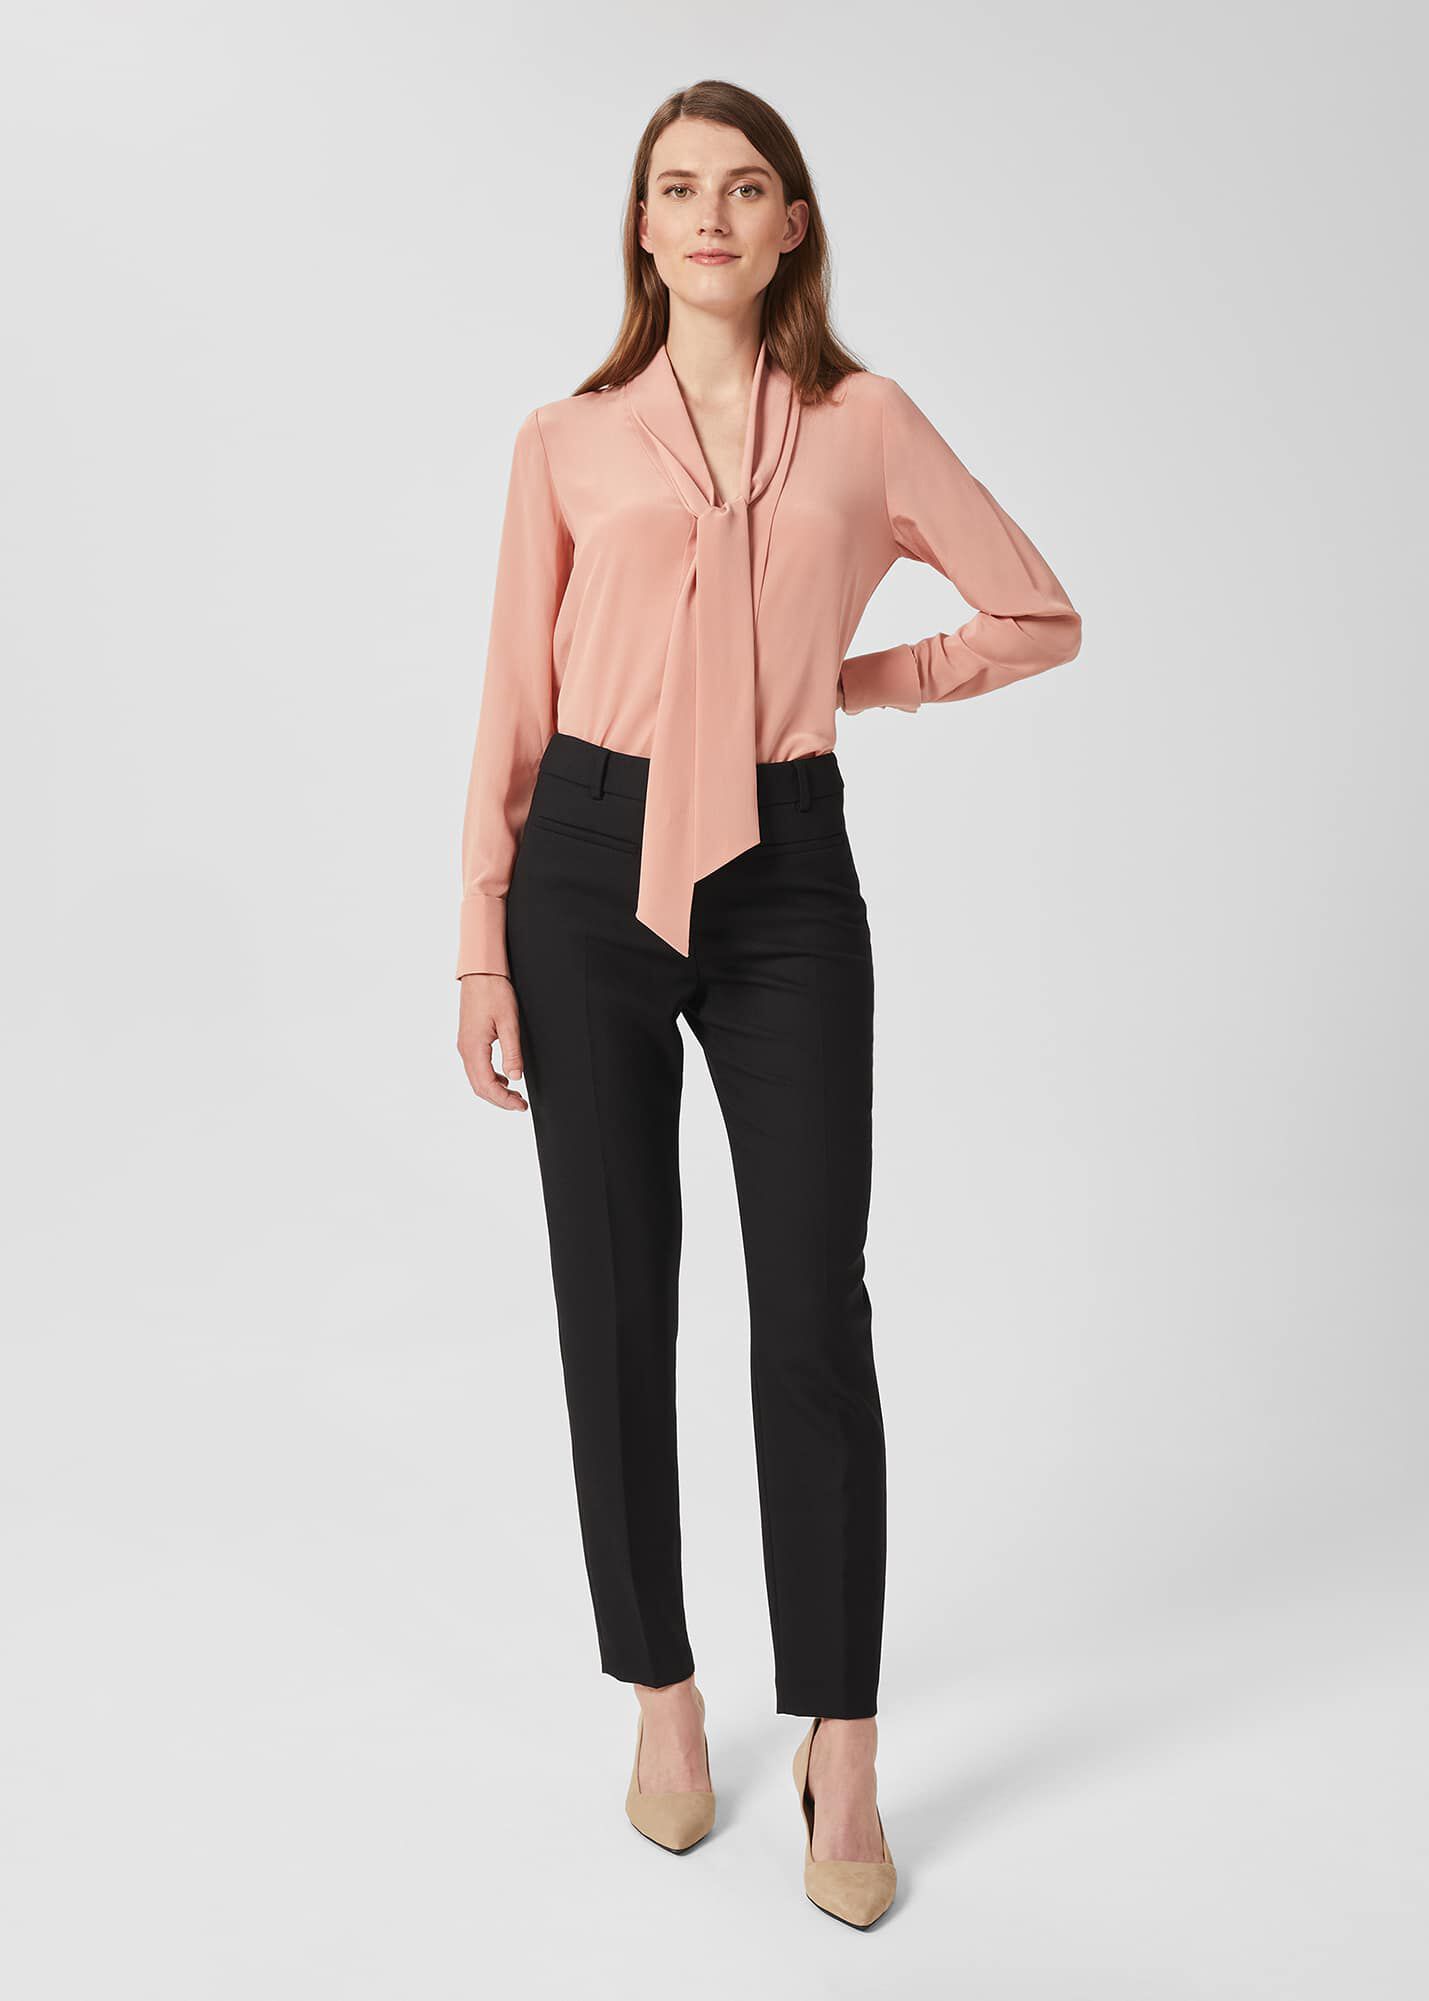 Women's Tapered Fit Trousers | Slim, Skinny, Fitted | Hobbs London |